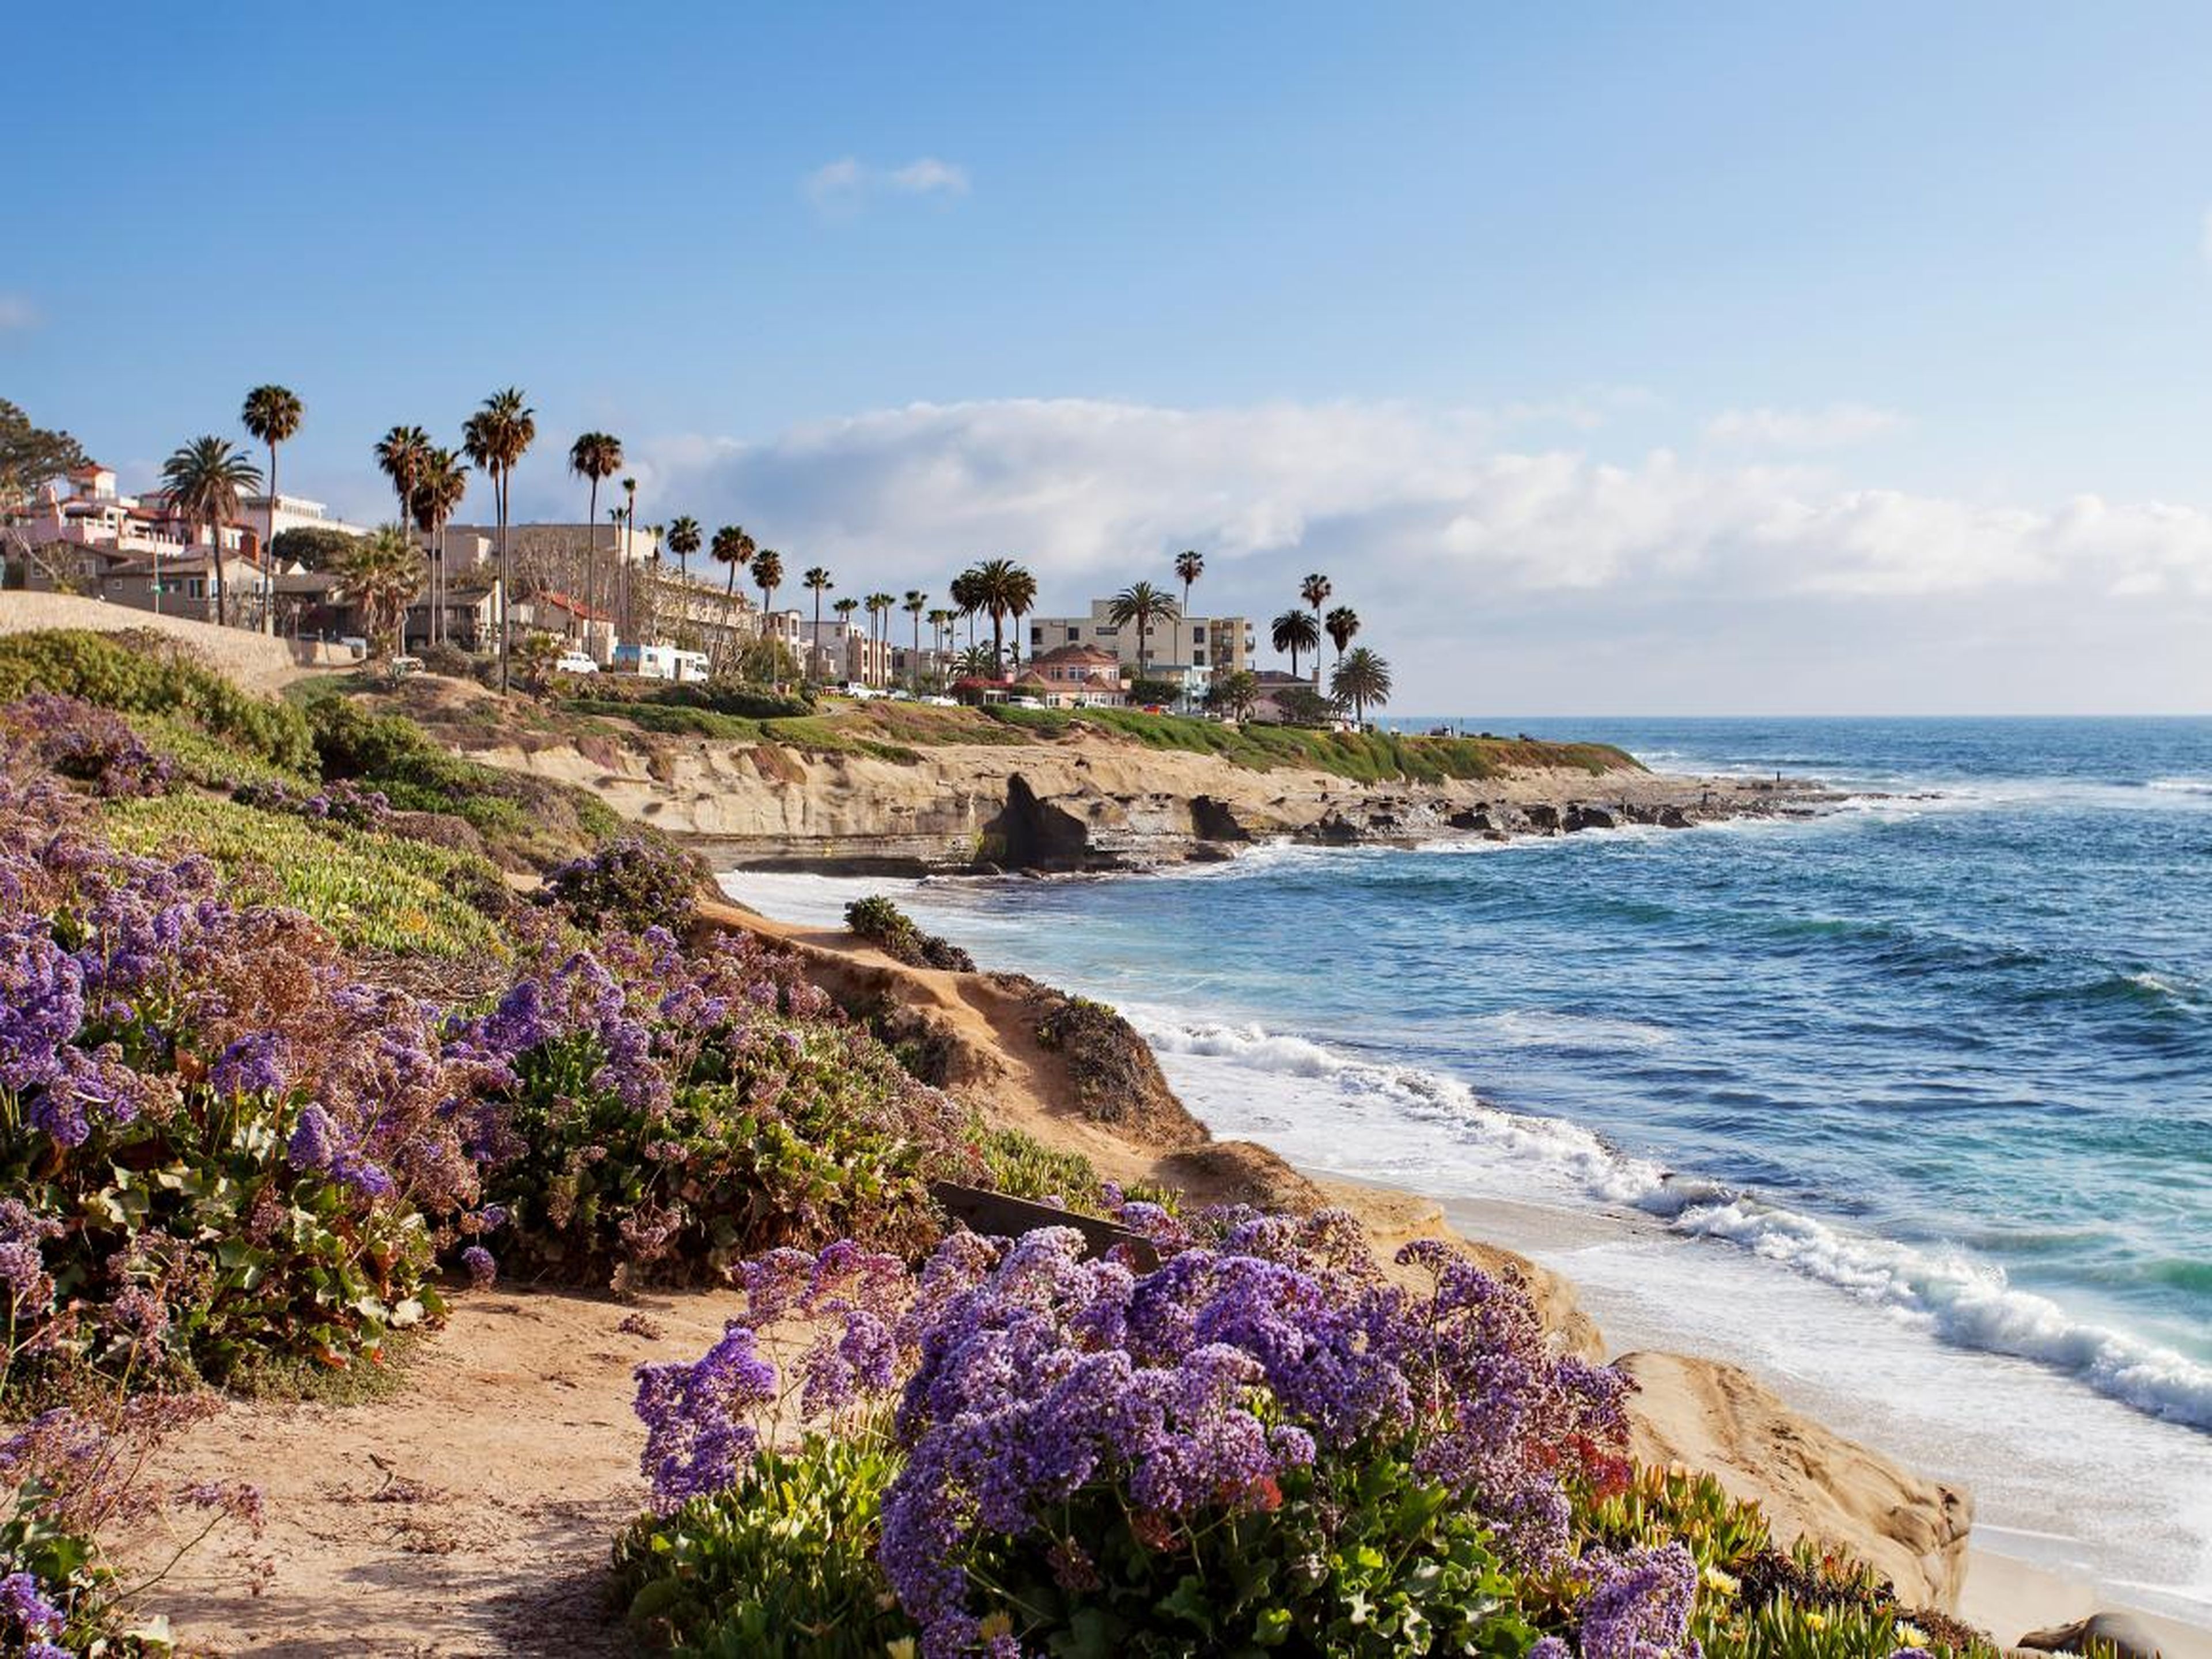 The real-life house is in La Jolla, a ritzy resort community 12 miles north of San Diego that's known for its scenic shoreline and multimillion-dollar homes.